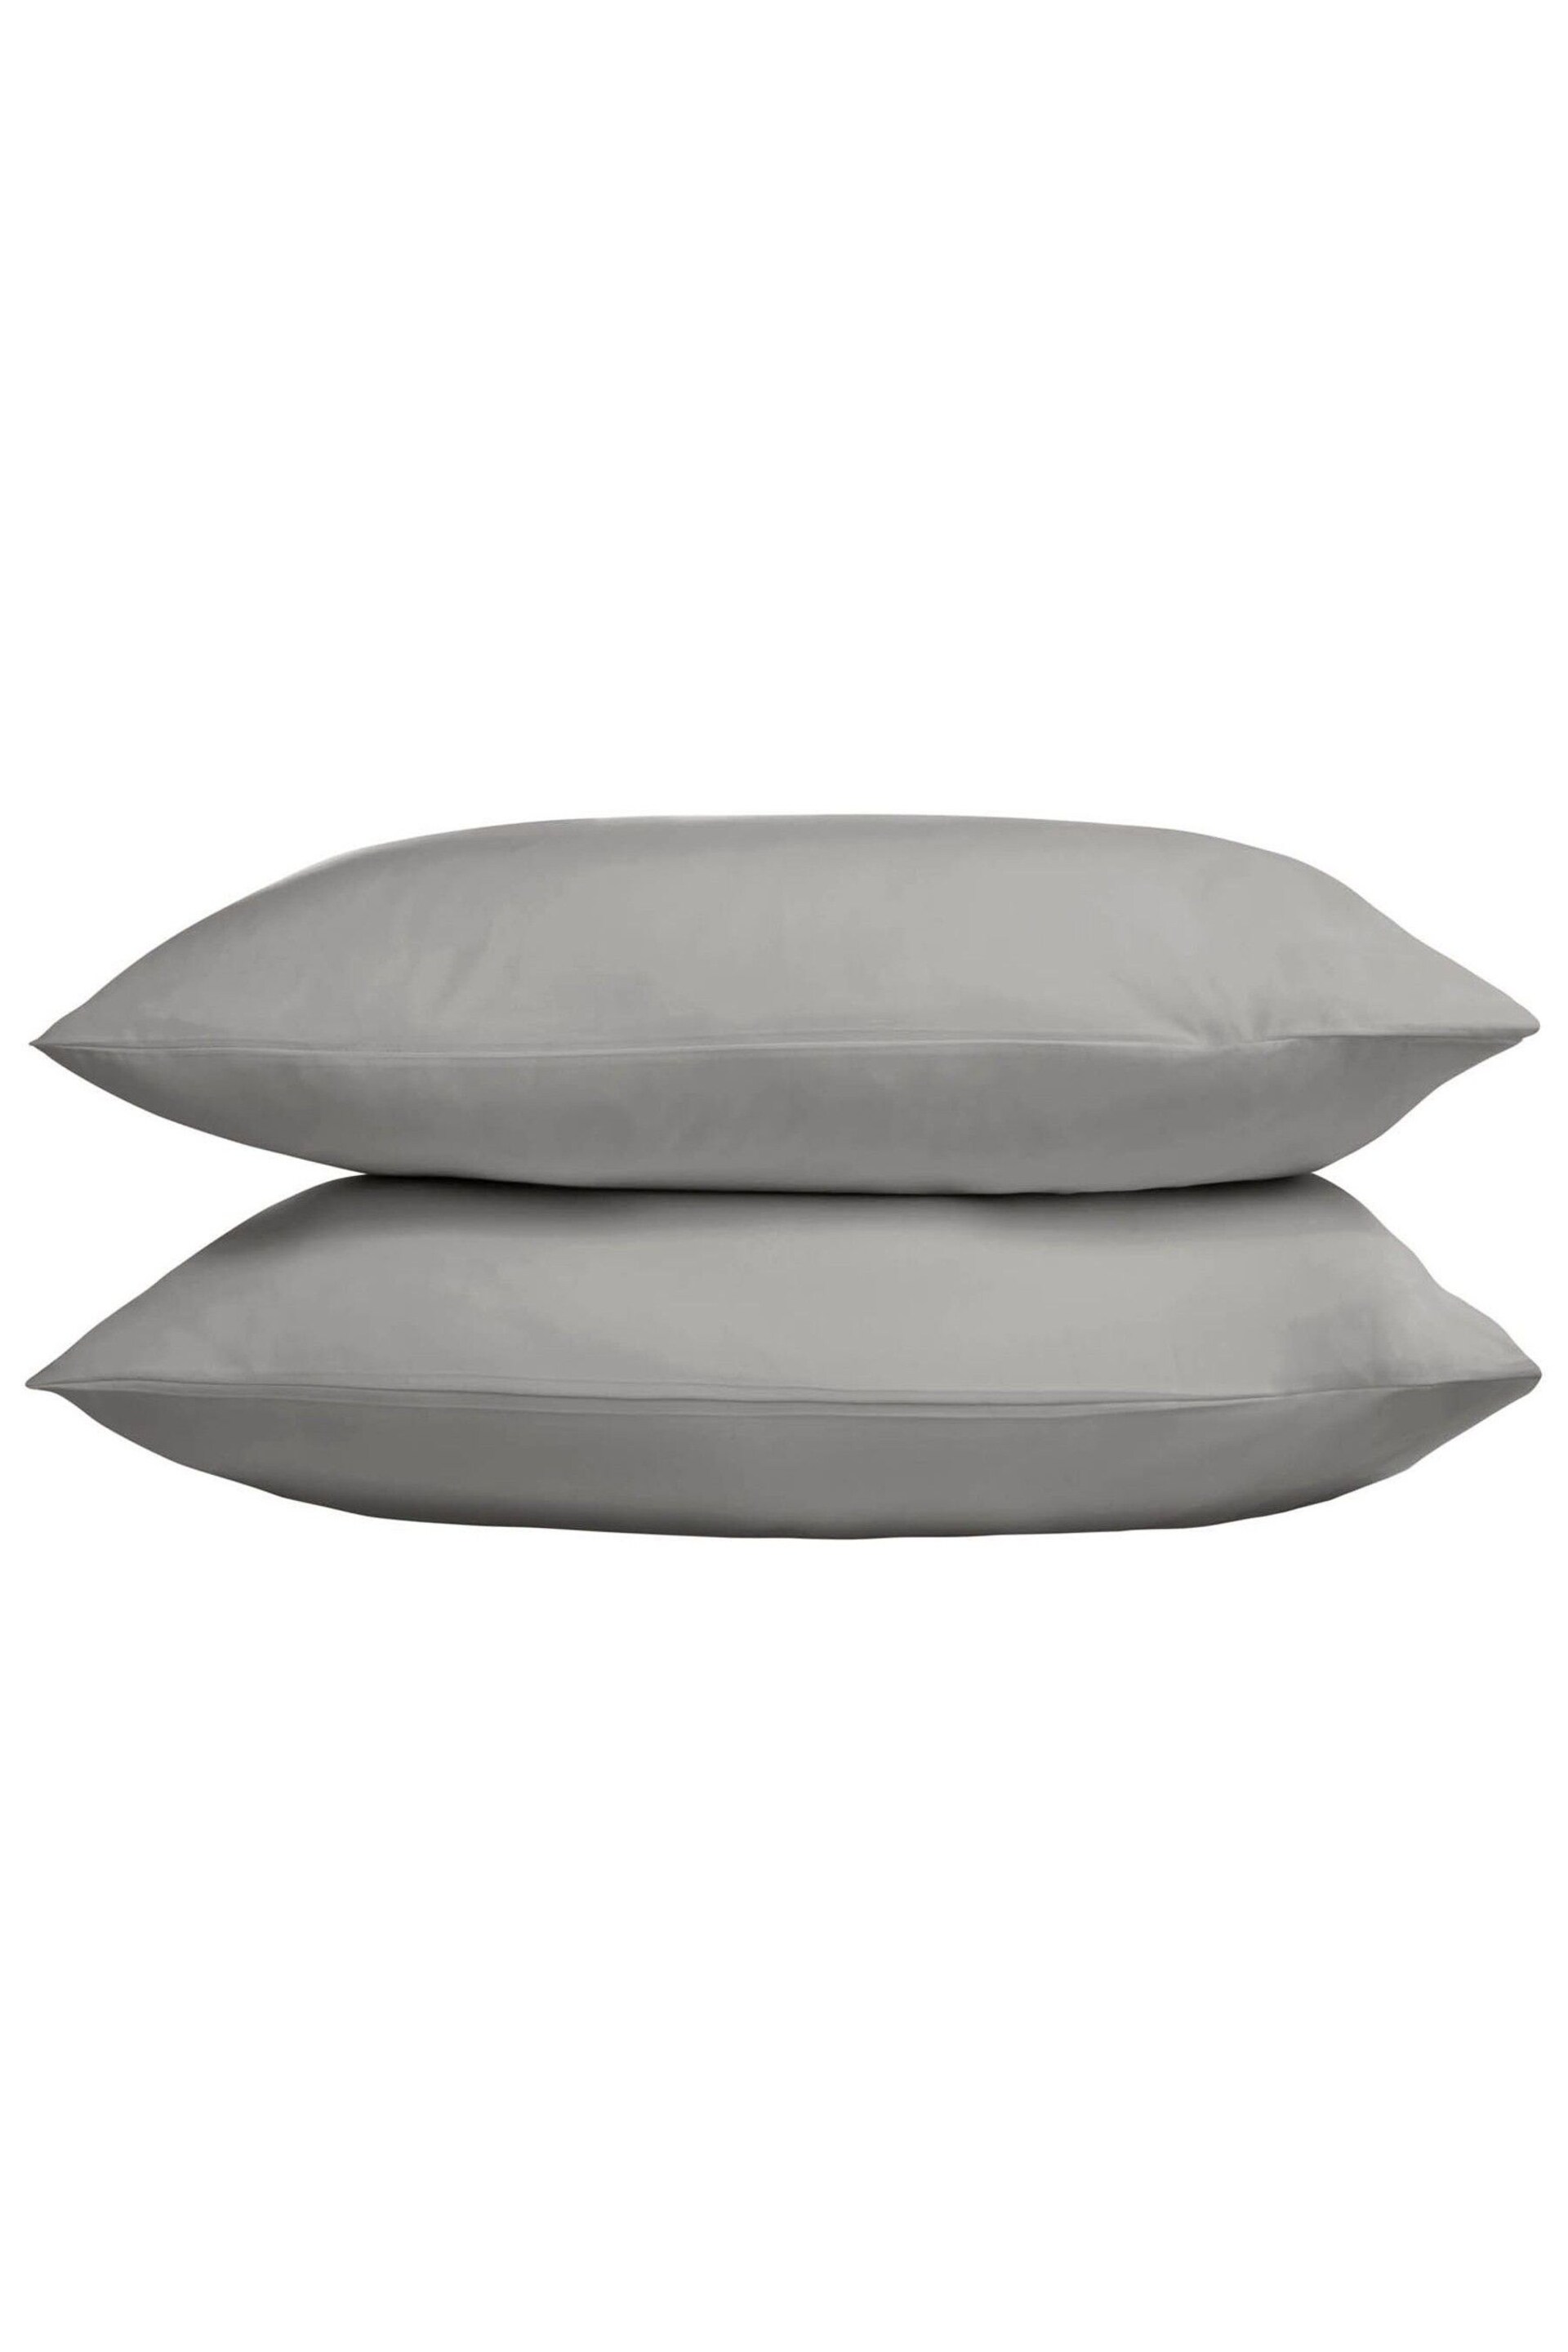 TLC Set of 2 Grey 5* 480 Thread Count Pillowcases - Image 1 of 1